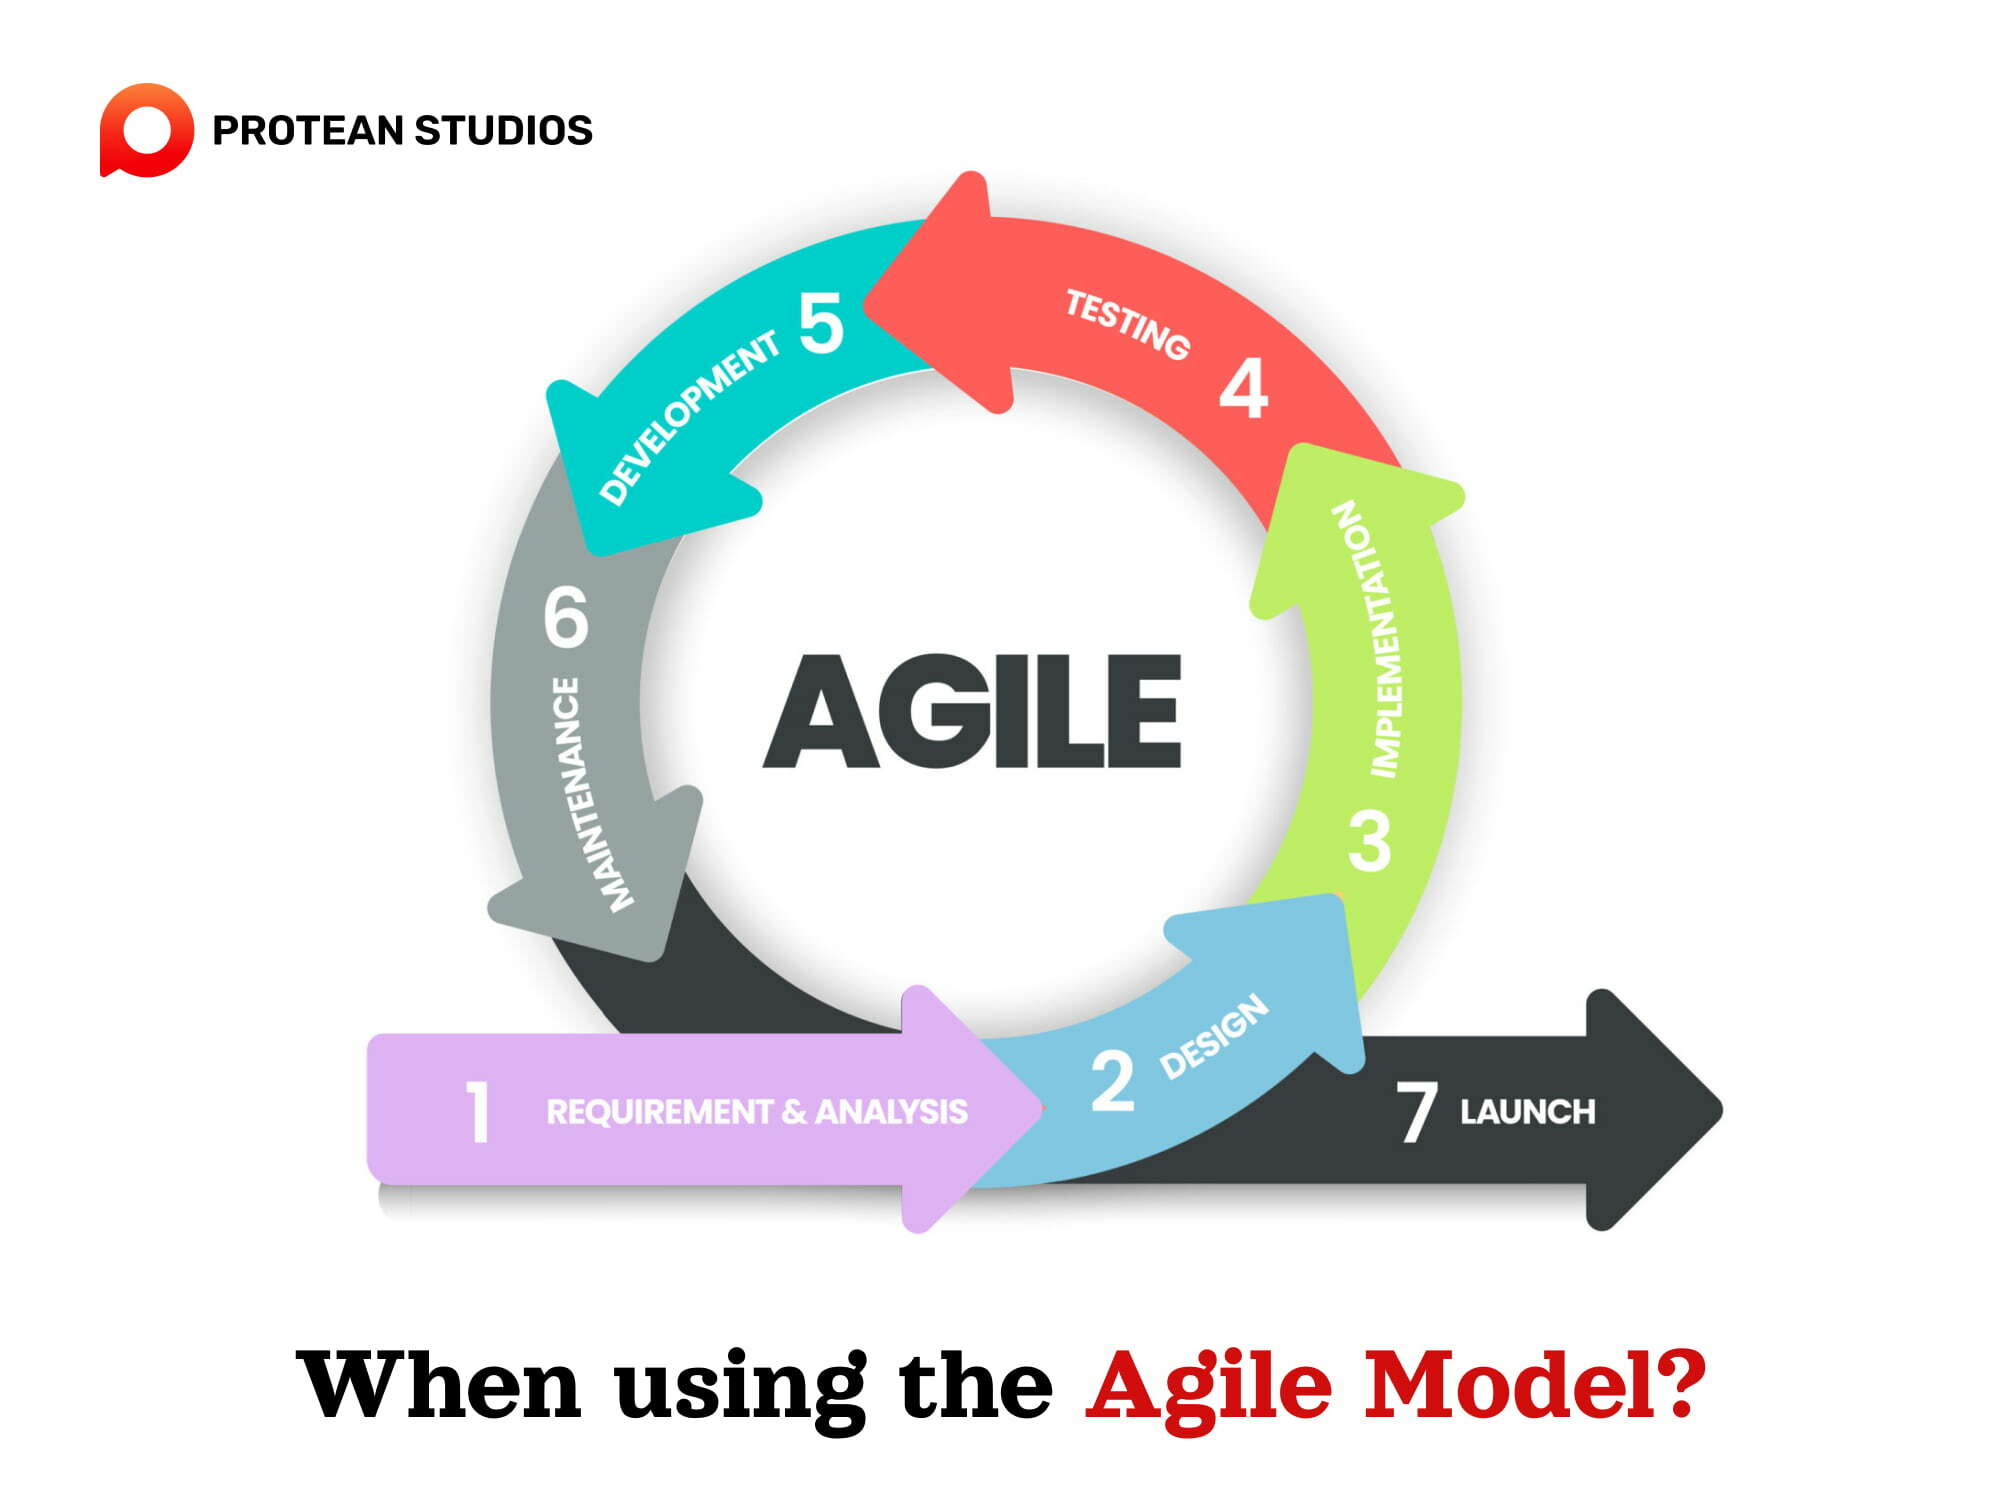 Situations that use the Agile model